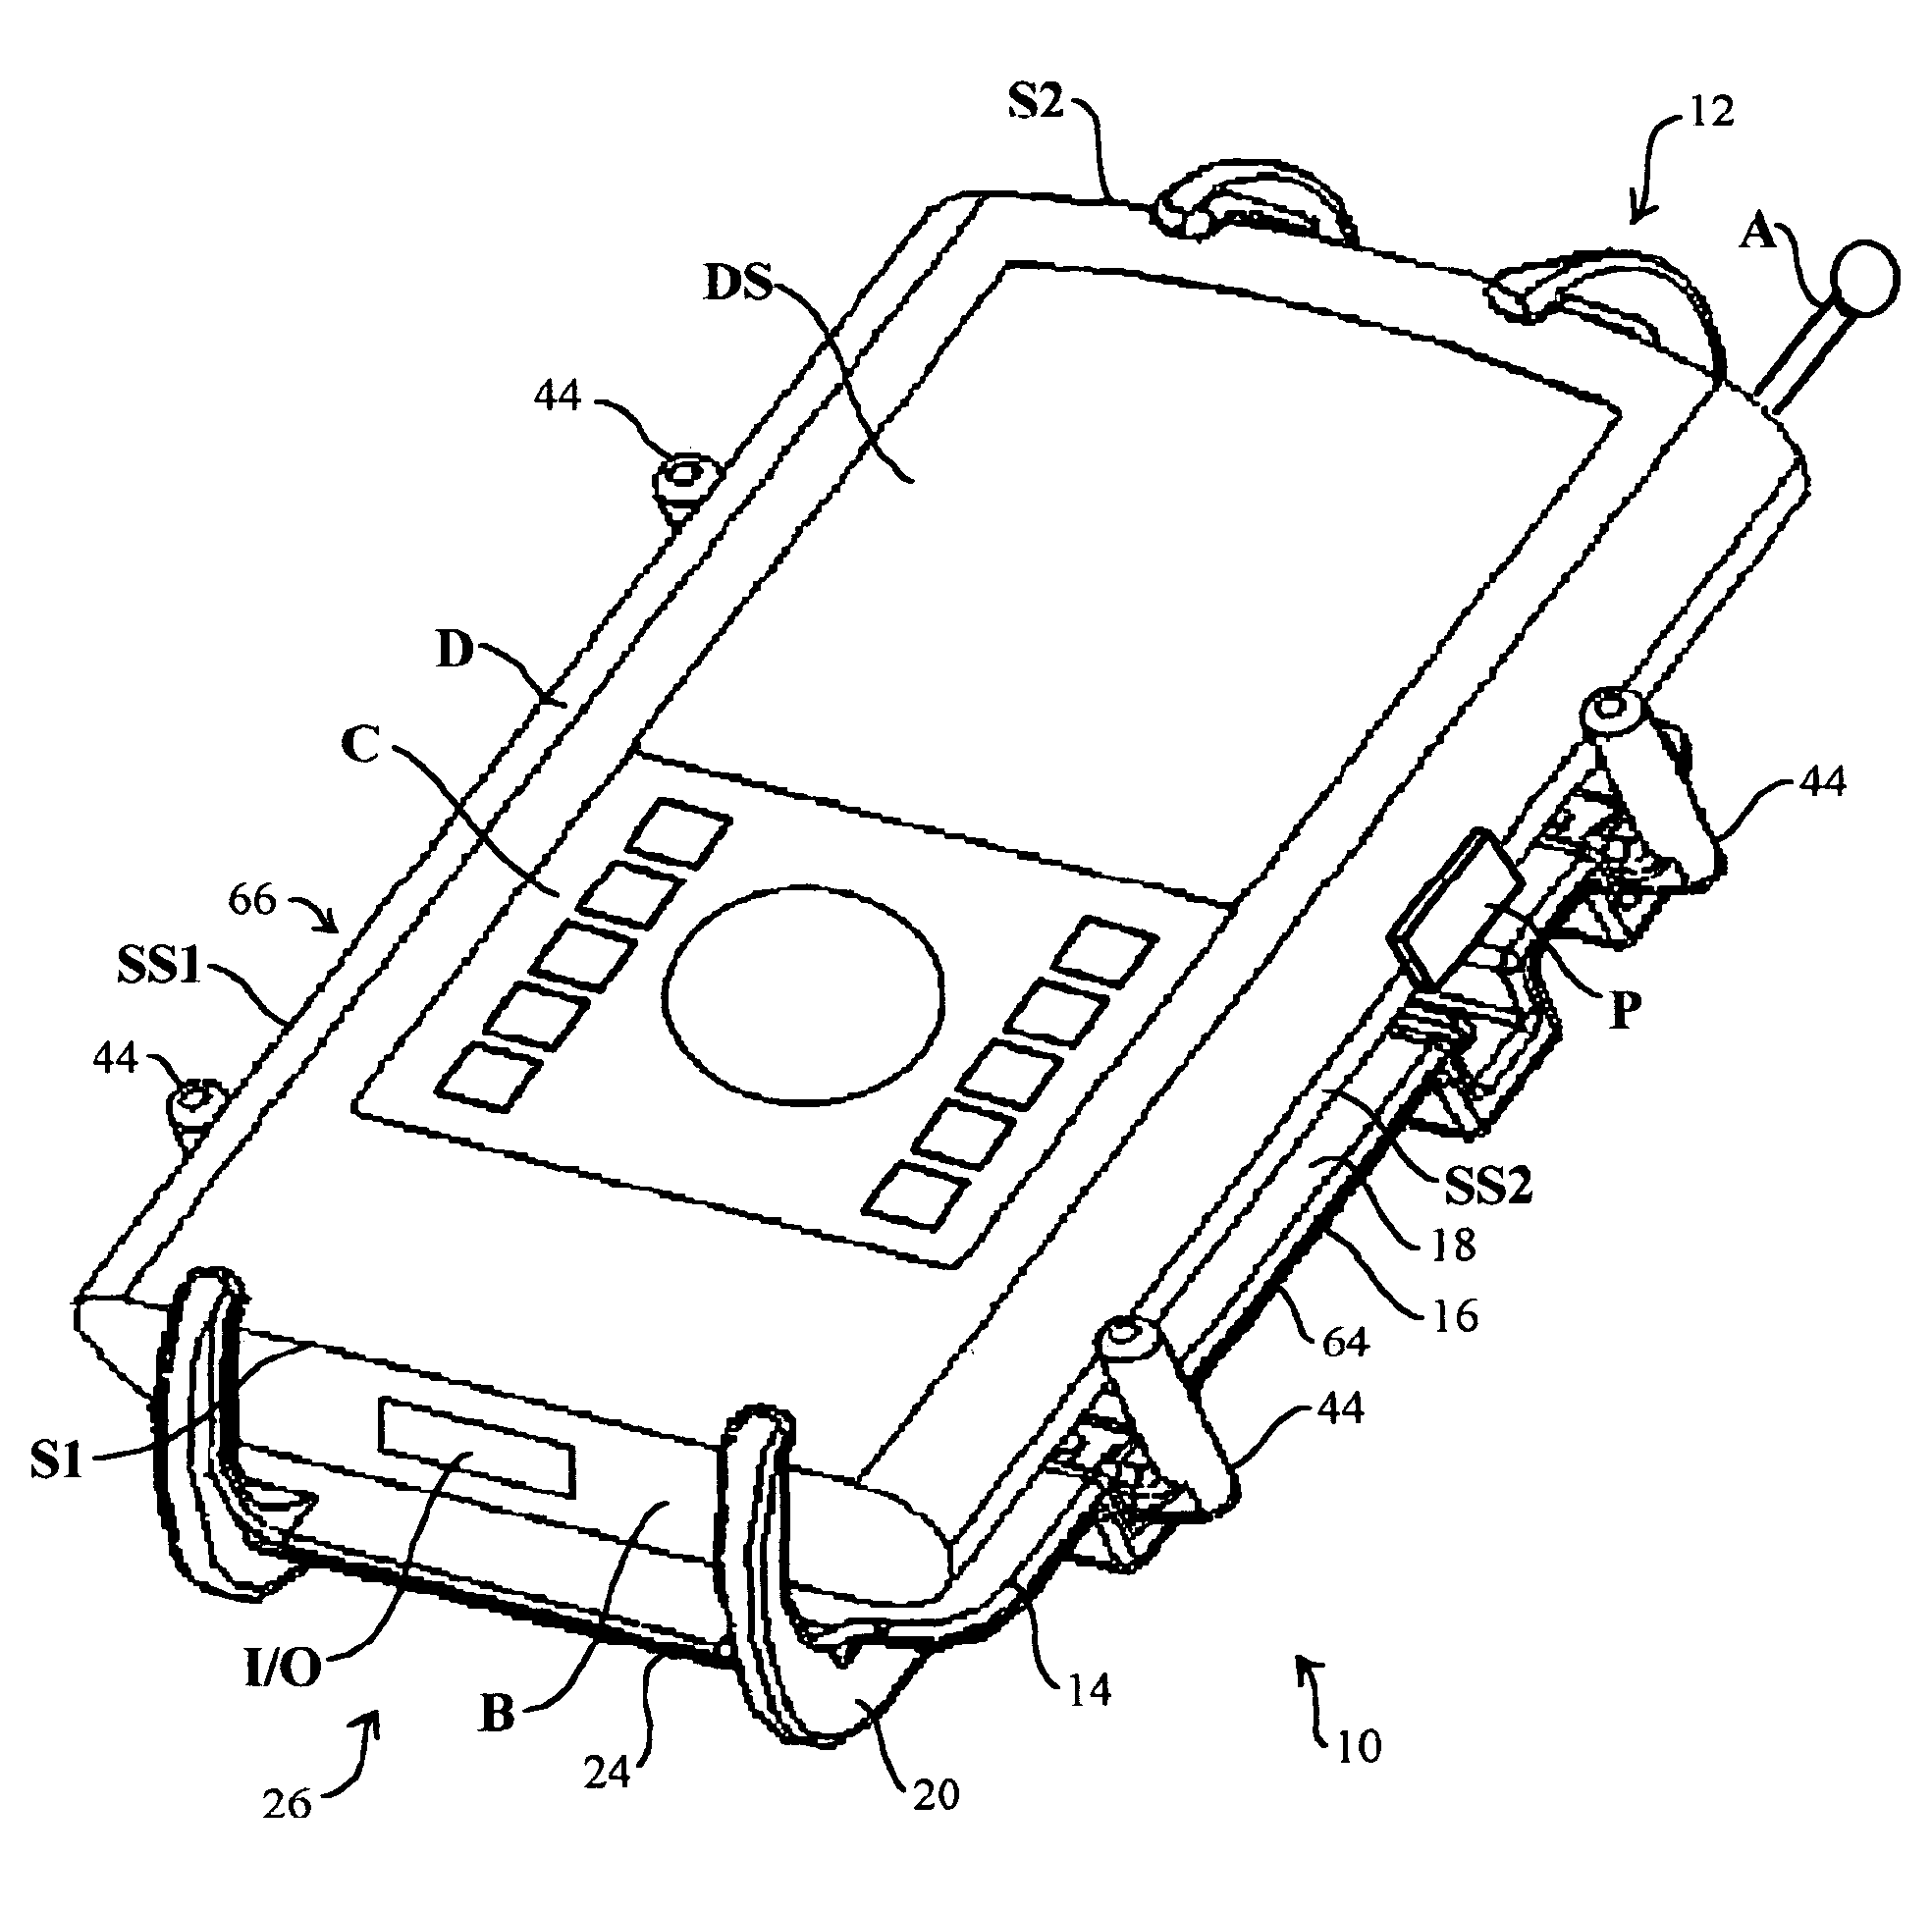 Secure universal mounting apparatus